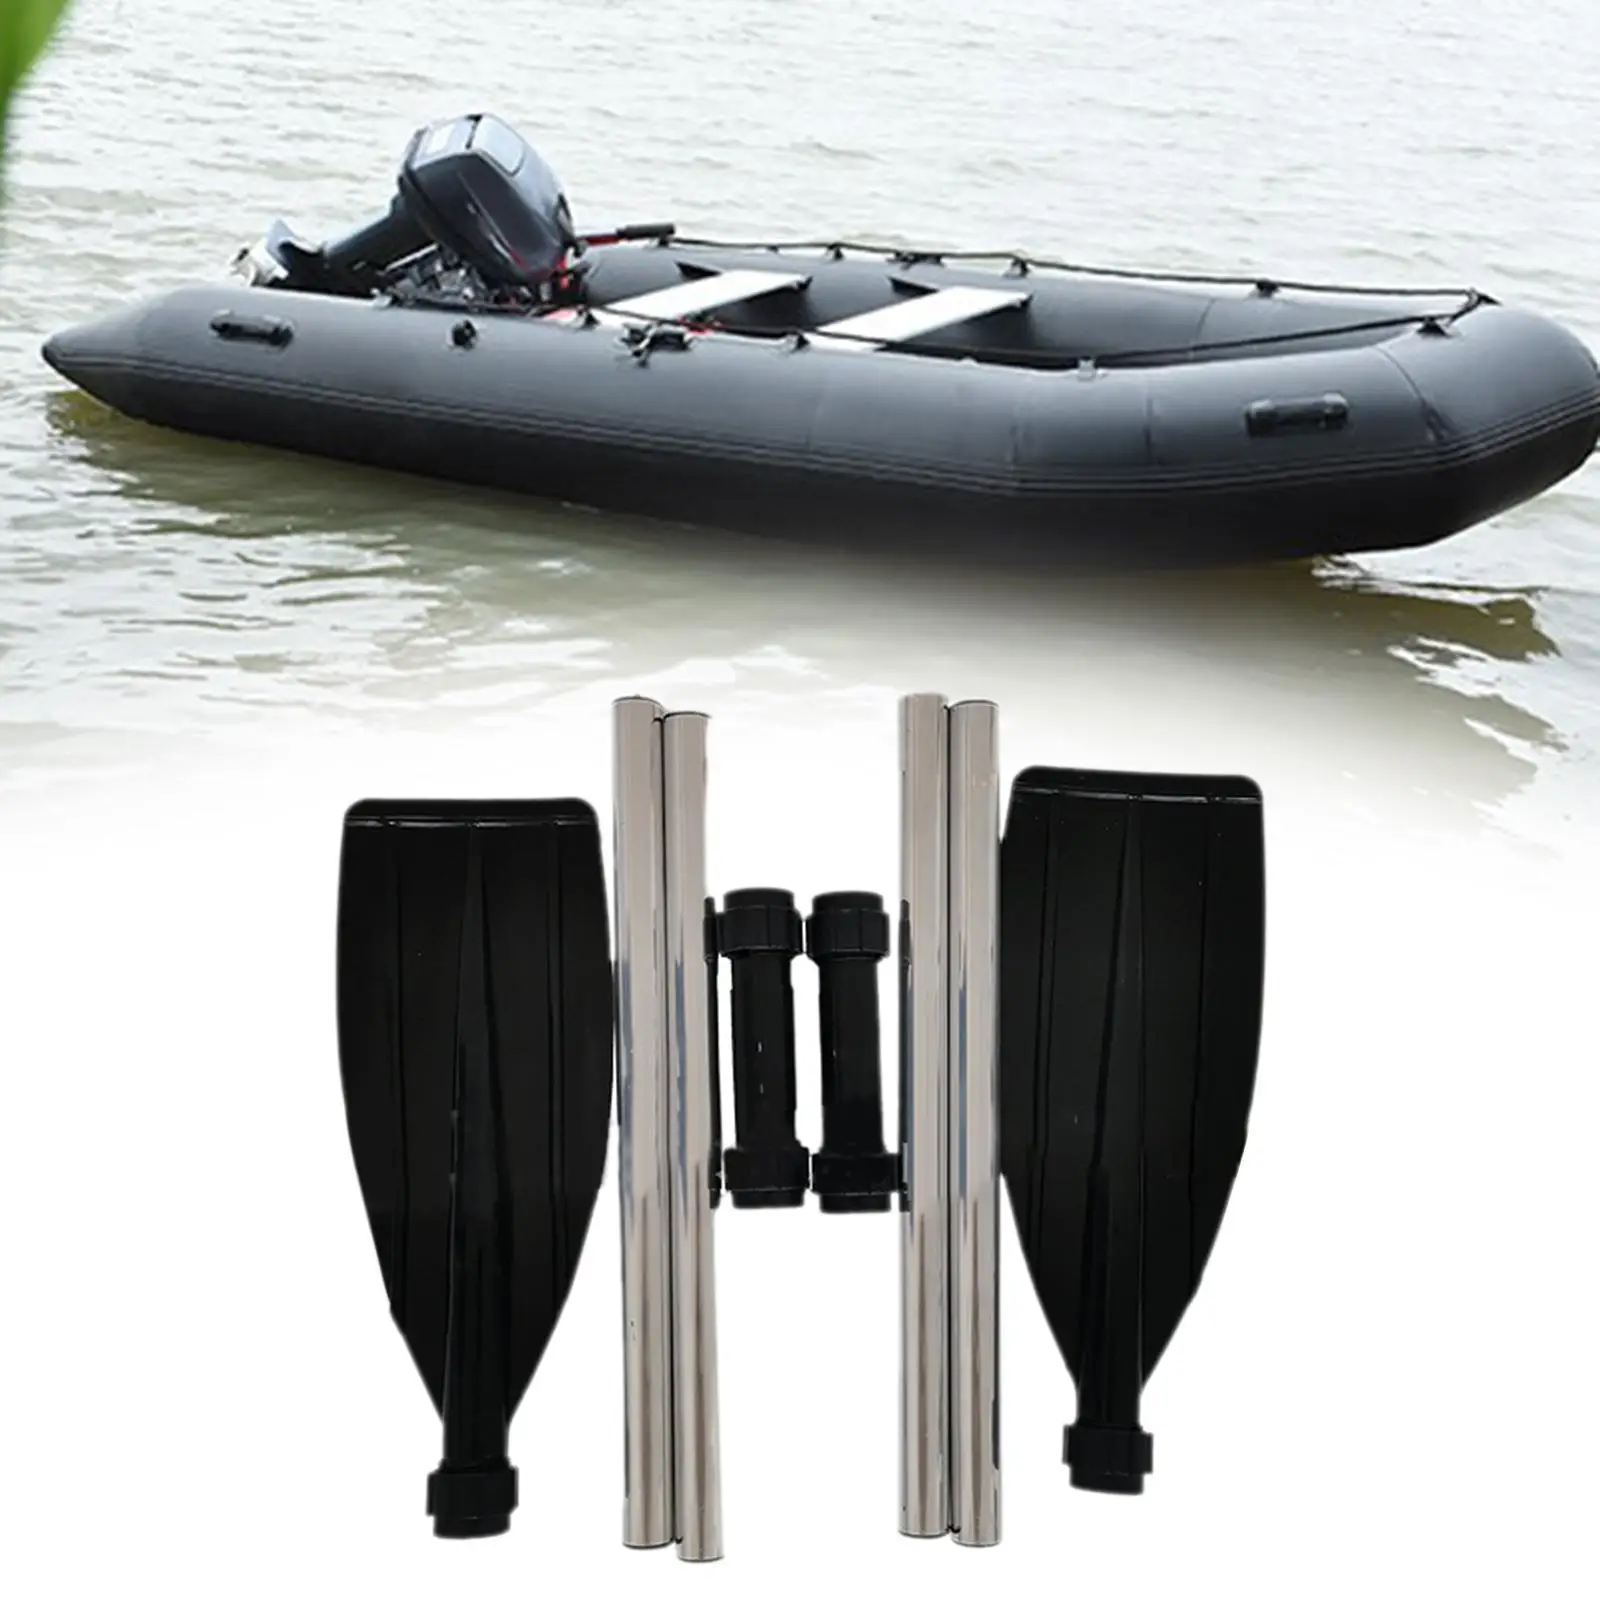 Paddle Convertible Aluminium Alloy Oar Paddleboard Floating Stand up Paddle